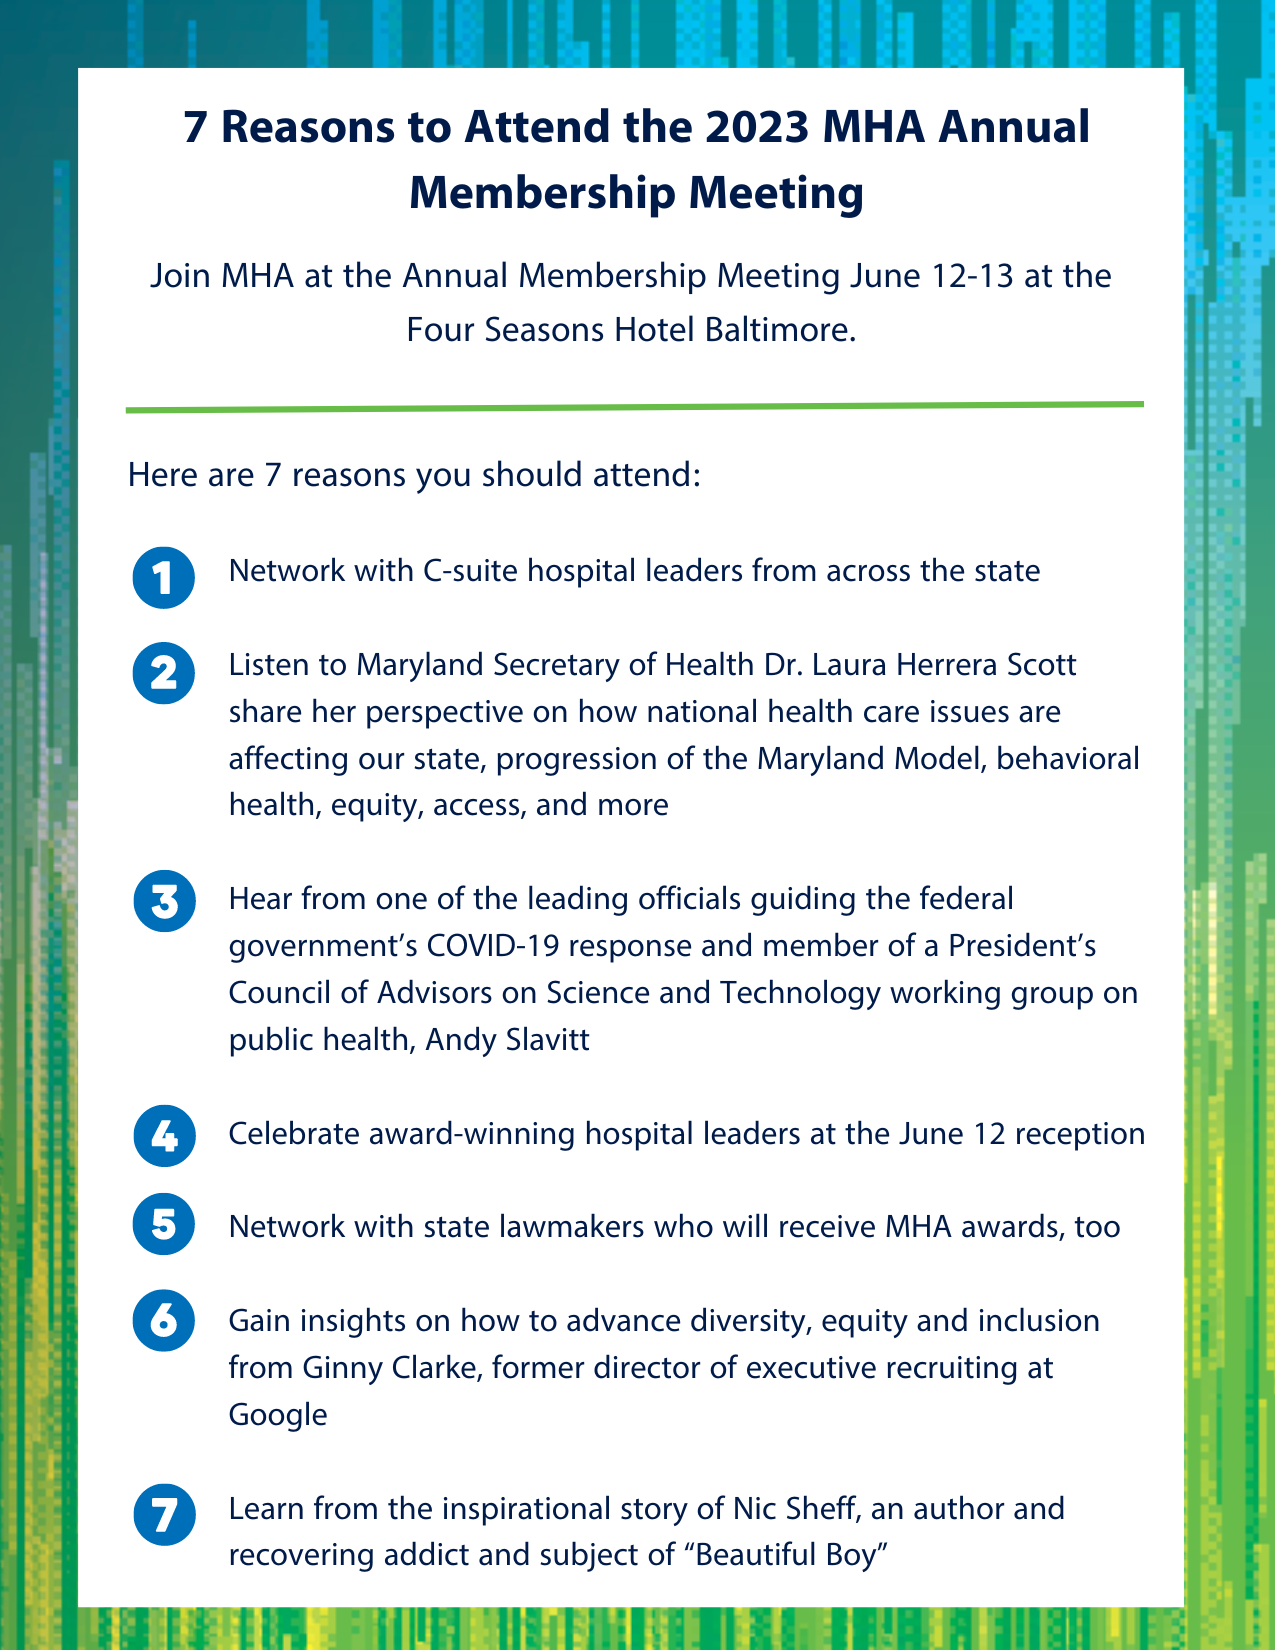 7 Reasons to Attend the 2023 MHA Annual Membership Meeting